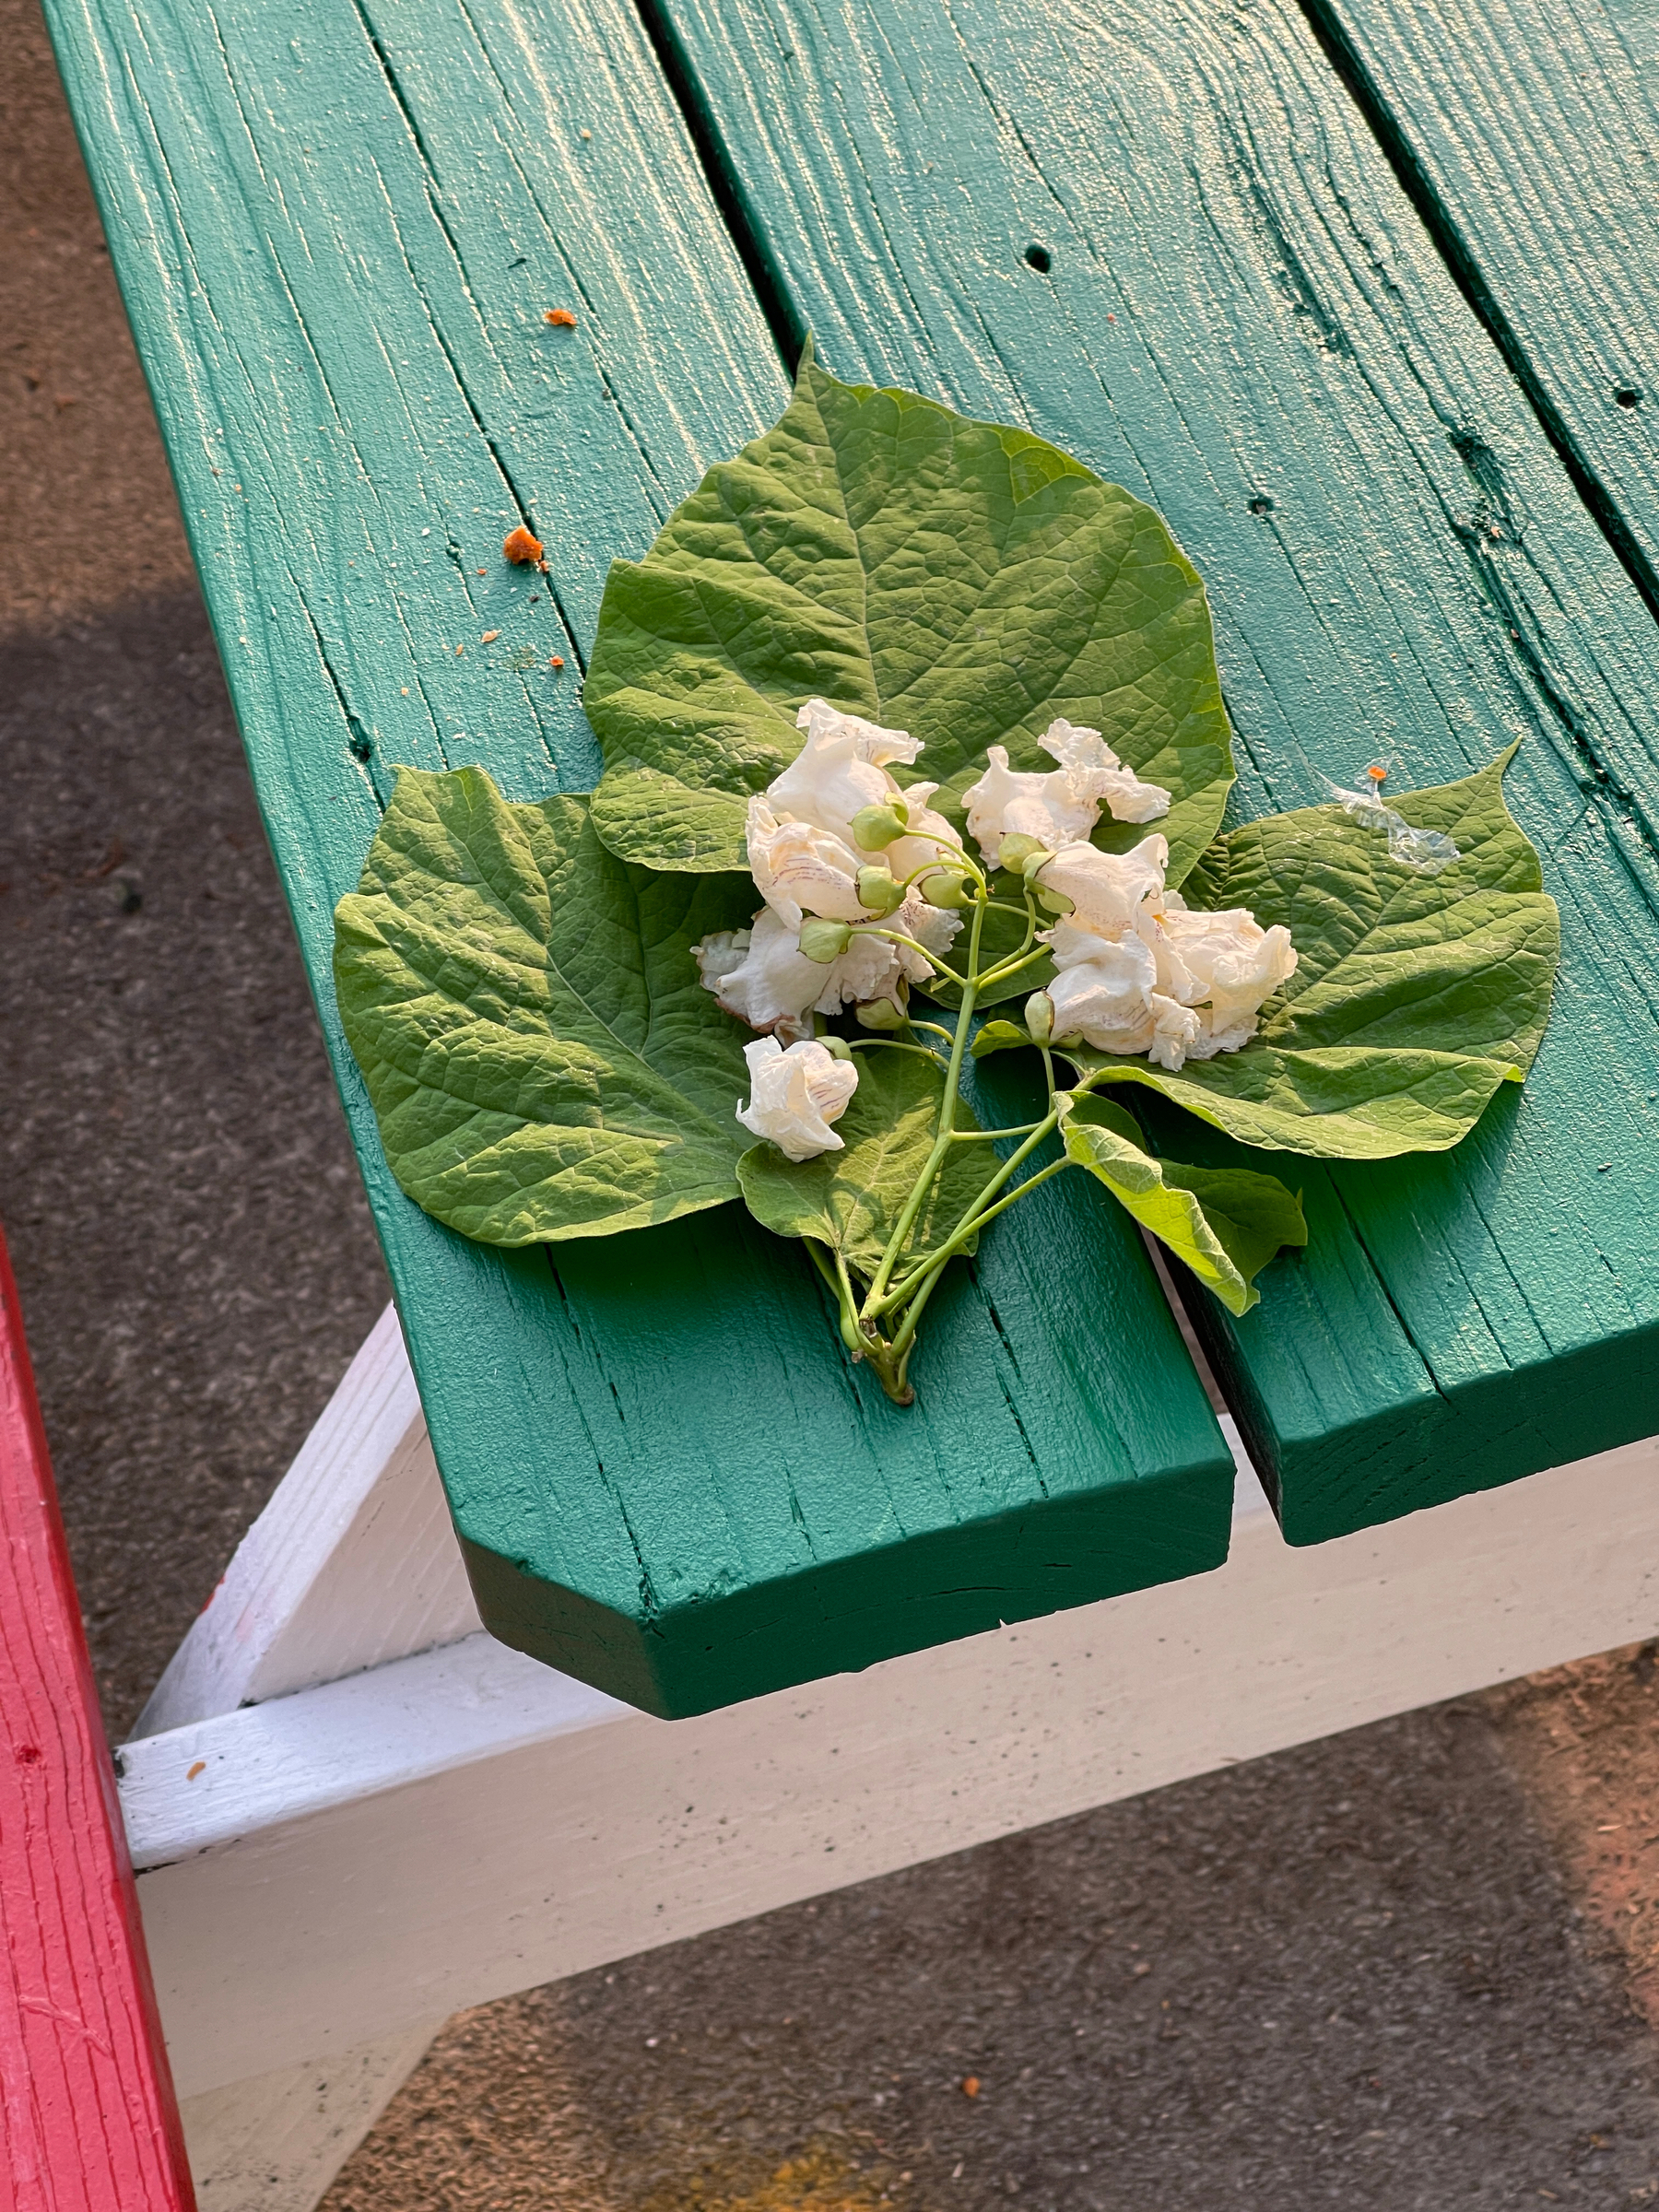 Blossoms and leaves on a green picnic table.